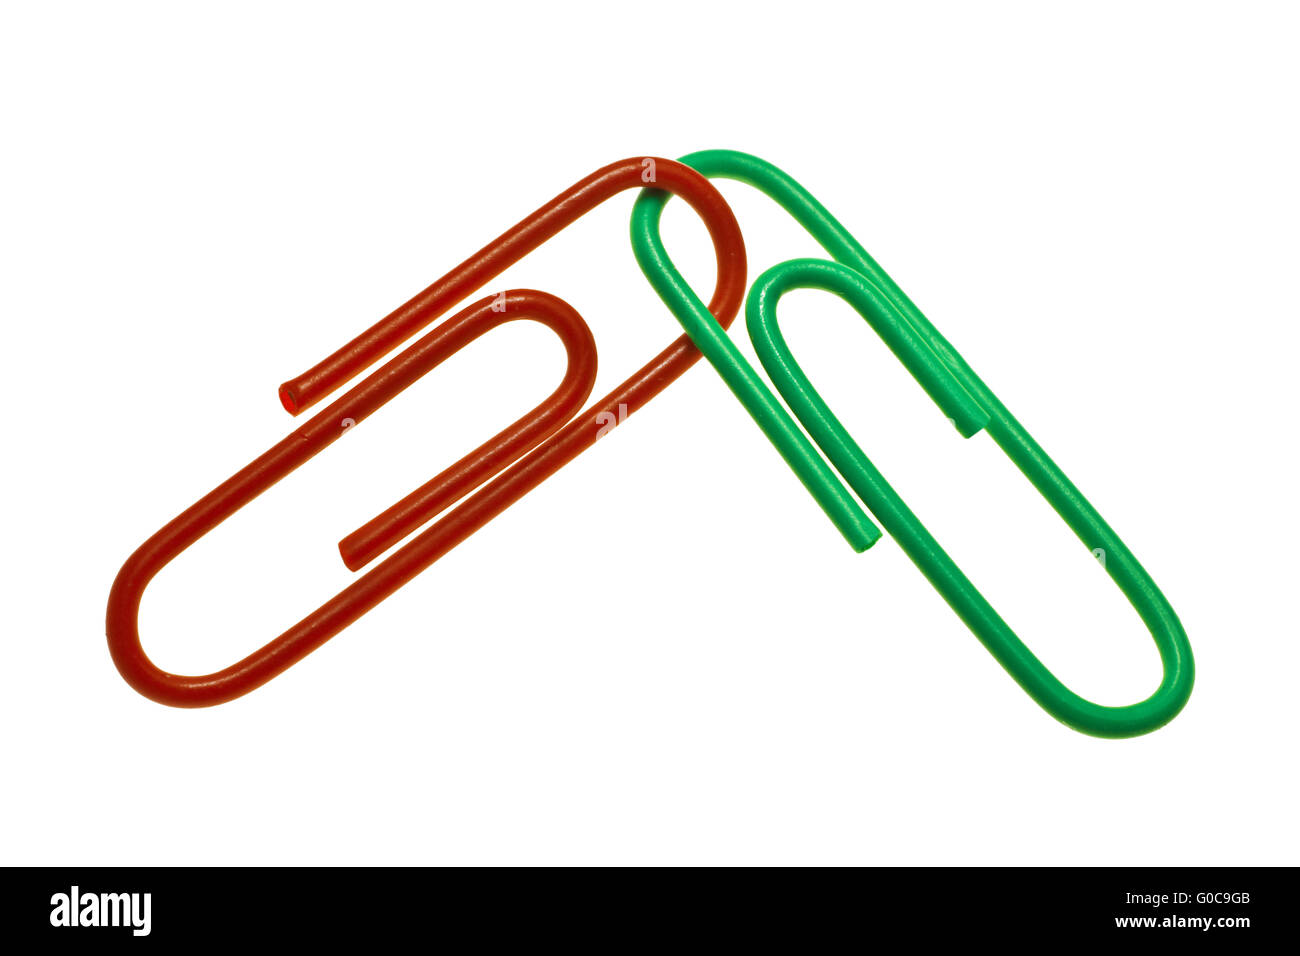 Red and green paper clips, symbolic image Stock Photo